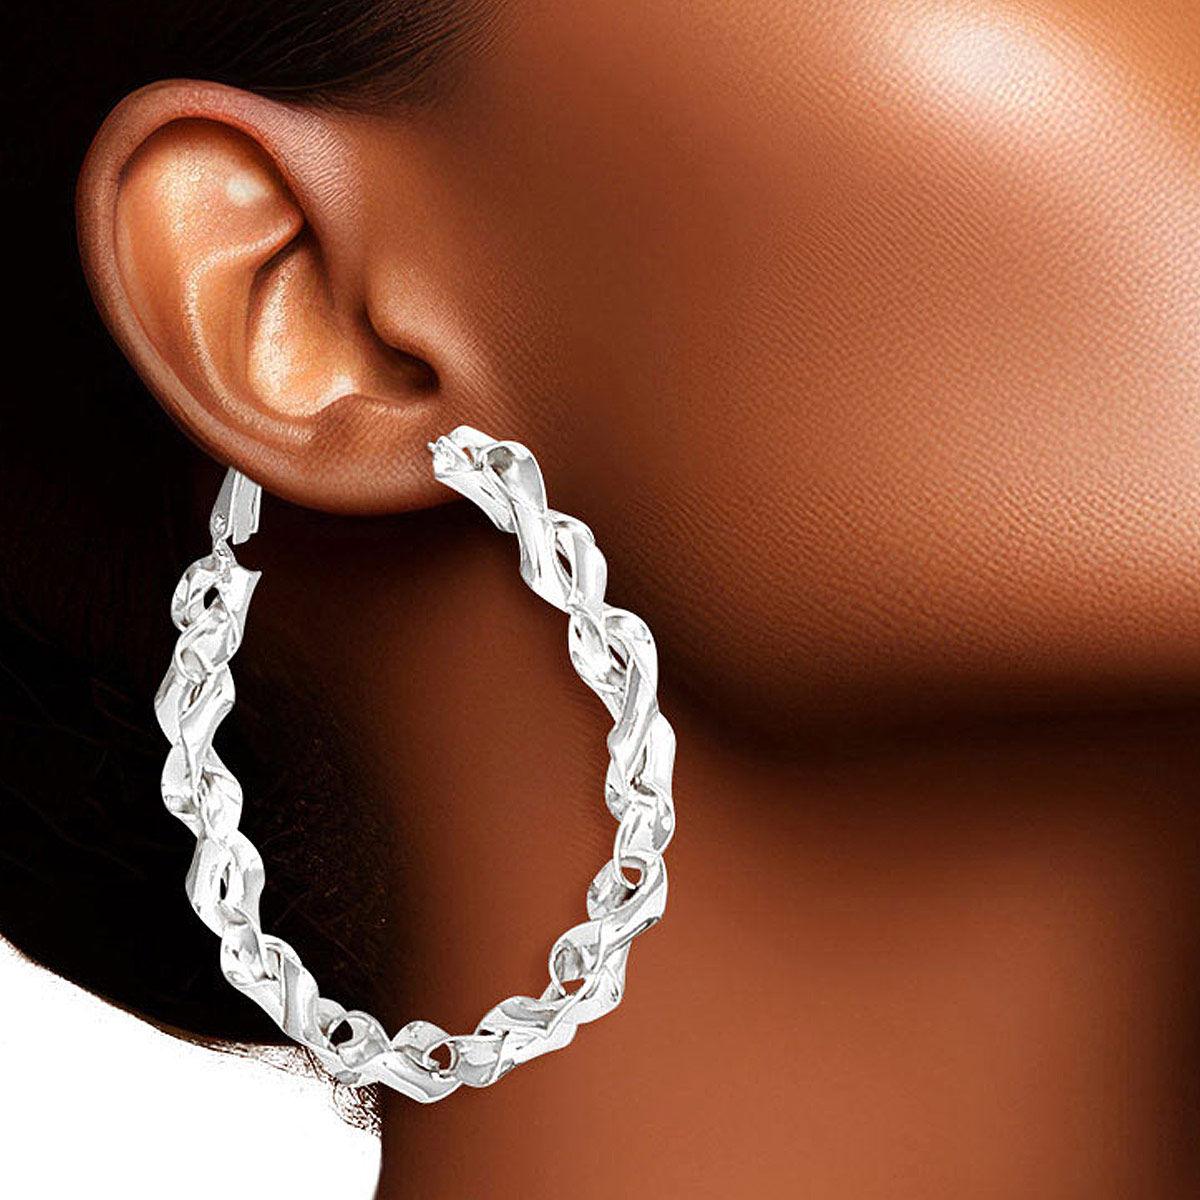 Get Ready to Slay with Twisted White Gold Finish Hoop Earrings: Stand Out!